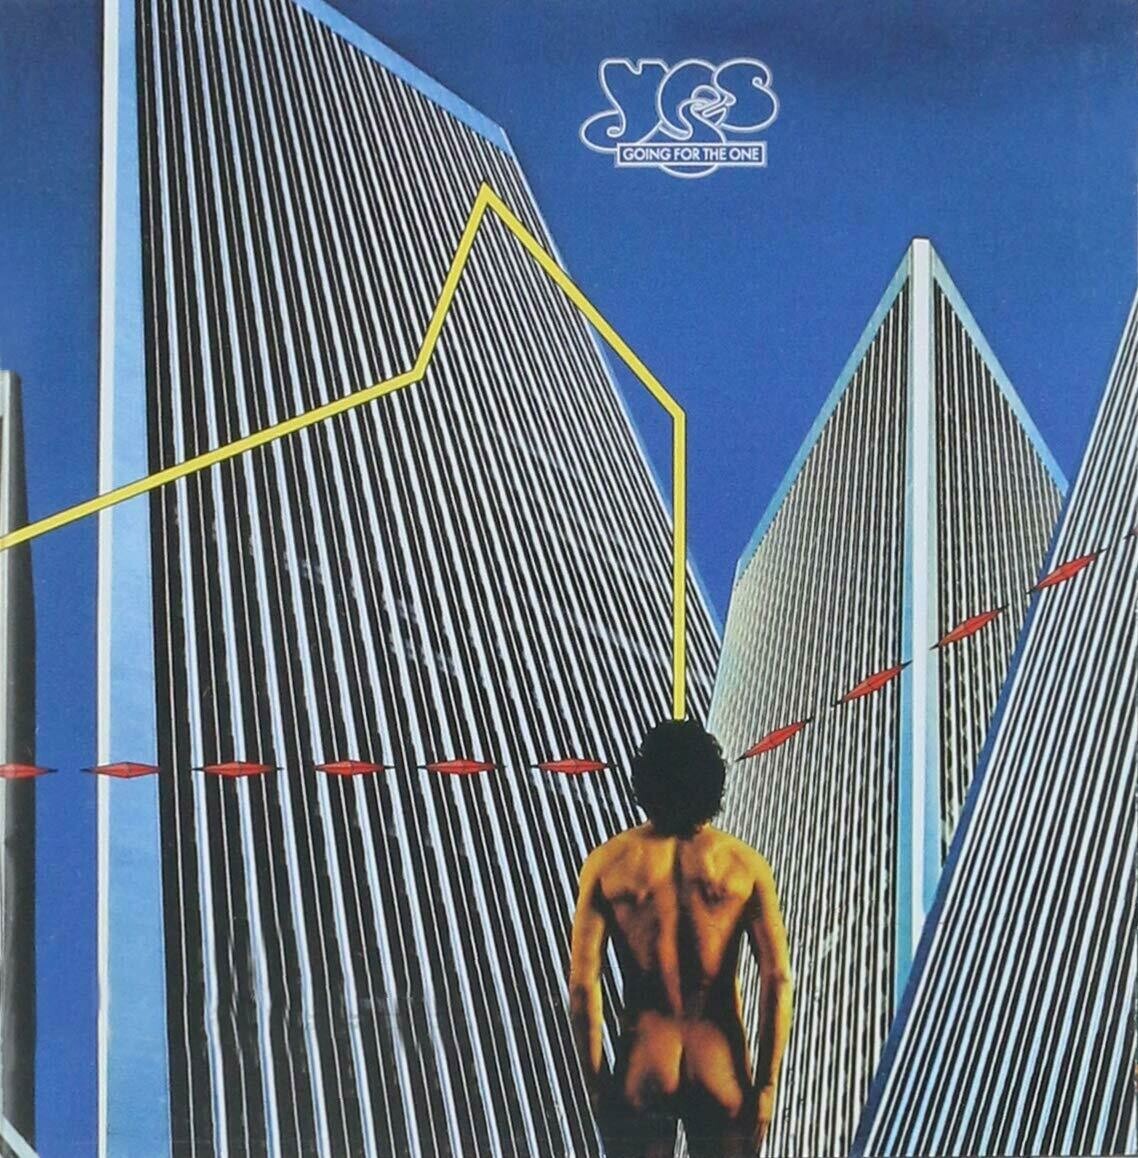 Yes "Going For The One" VG 1977